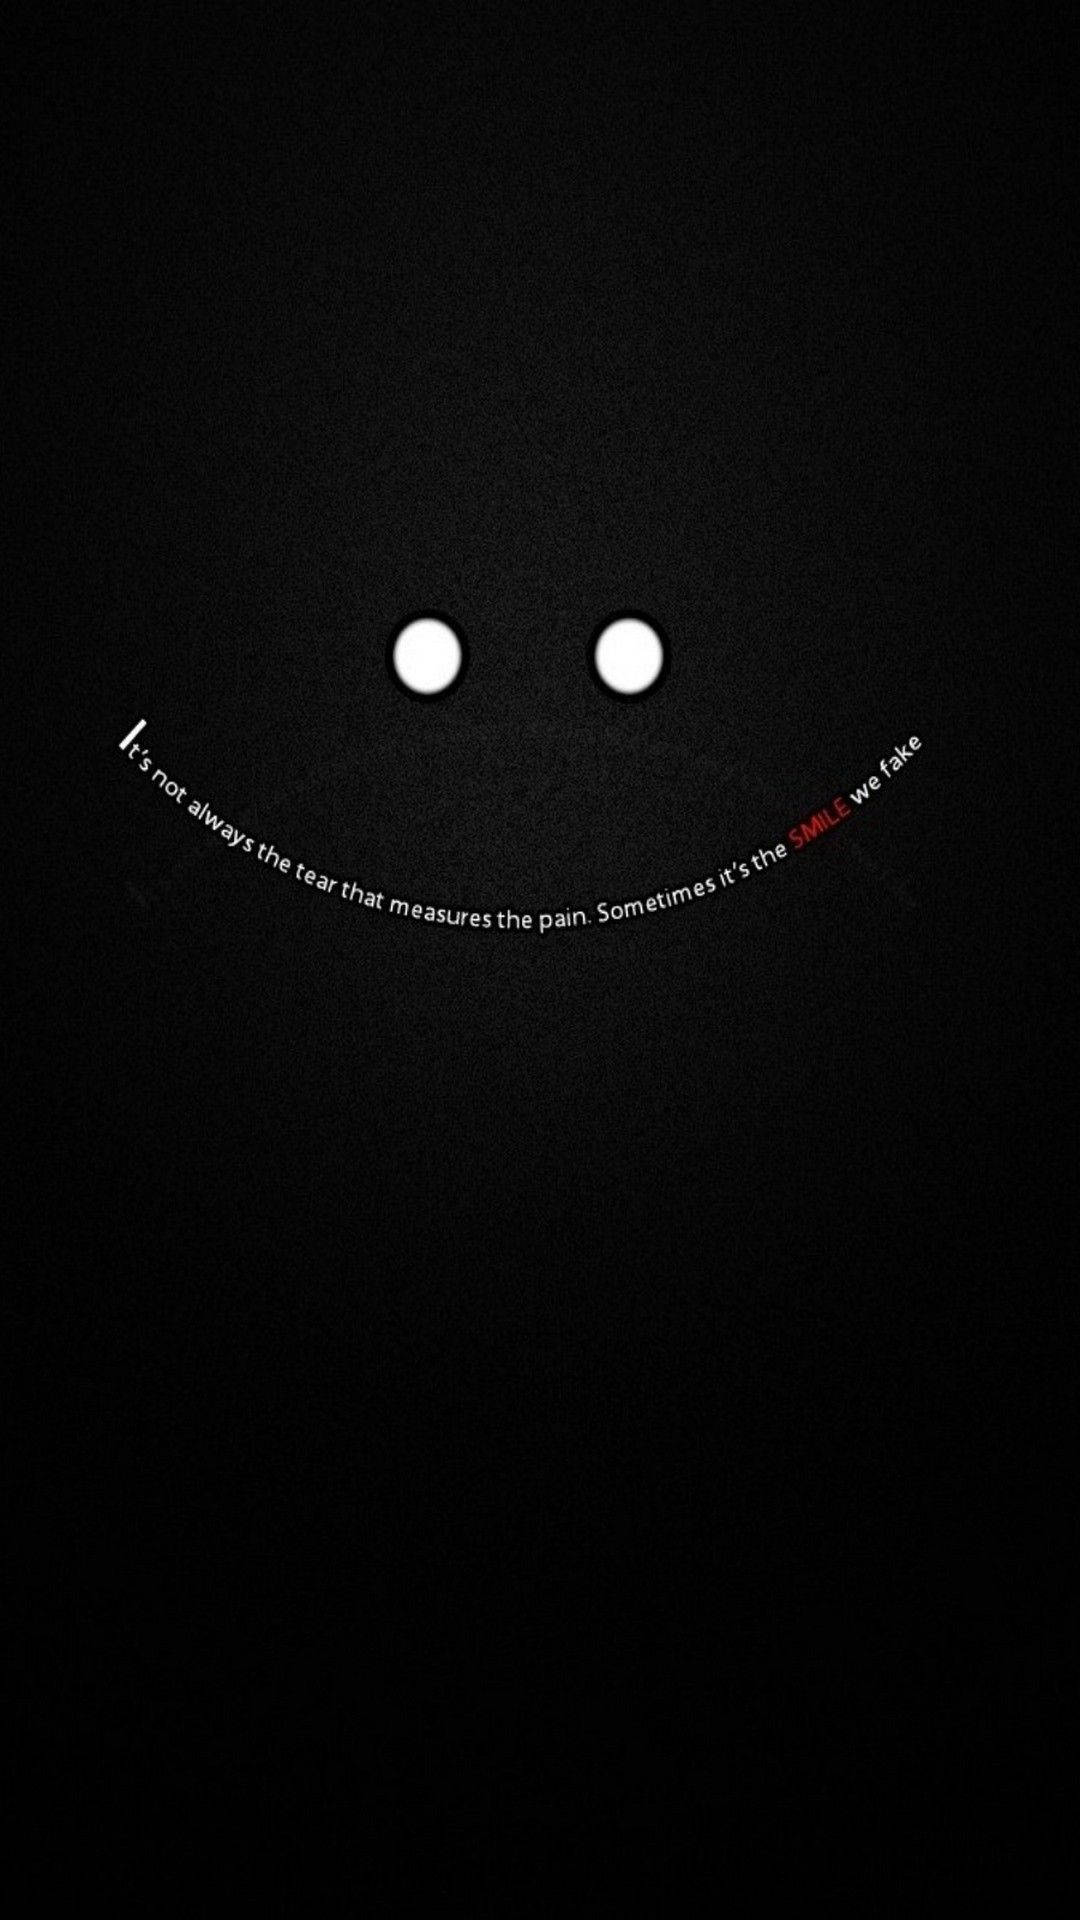 Sort Android Smiley Wallpaper